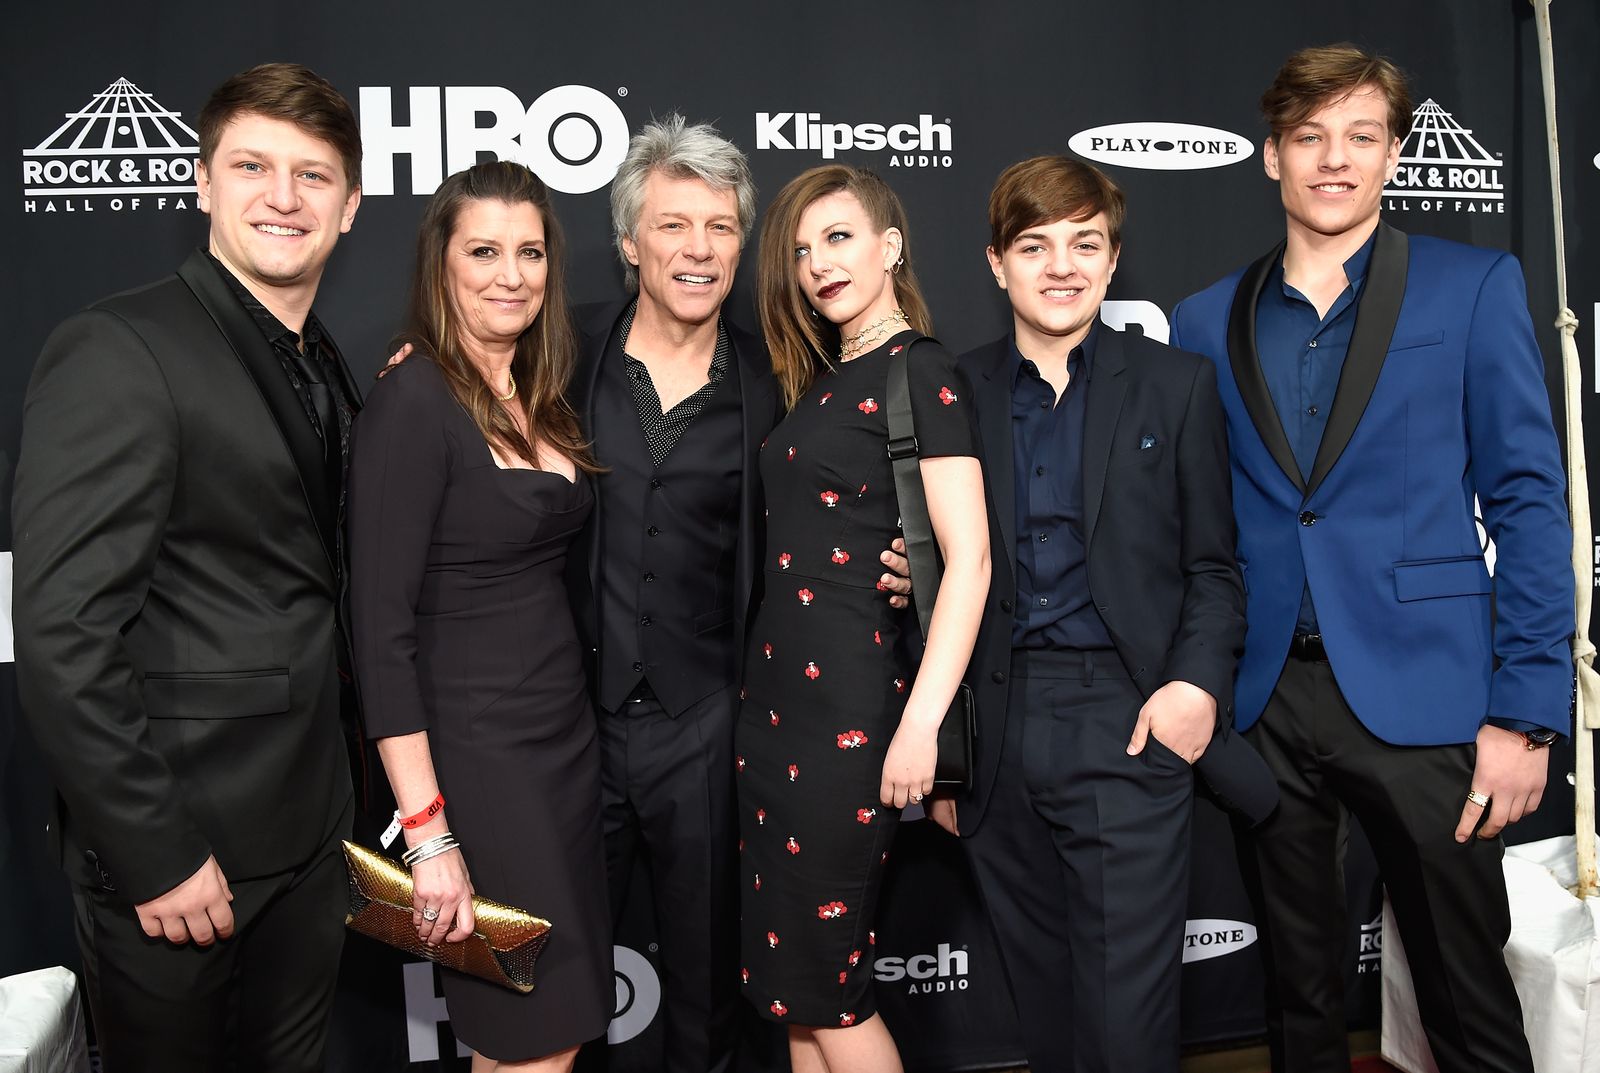  Jon Bon Jovi with his wife Hurley and their kids attend the 33rd Annual Rock & Roll Hall of Fame Induction Ceremony at Public Auditorium on April 14, 2018 in Cleveland, Ohio. | Photo: Getty Images